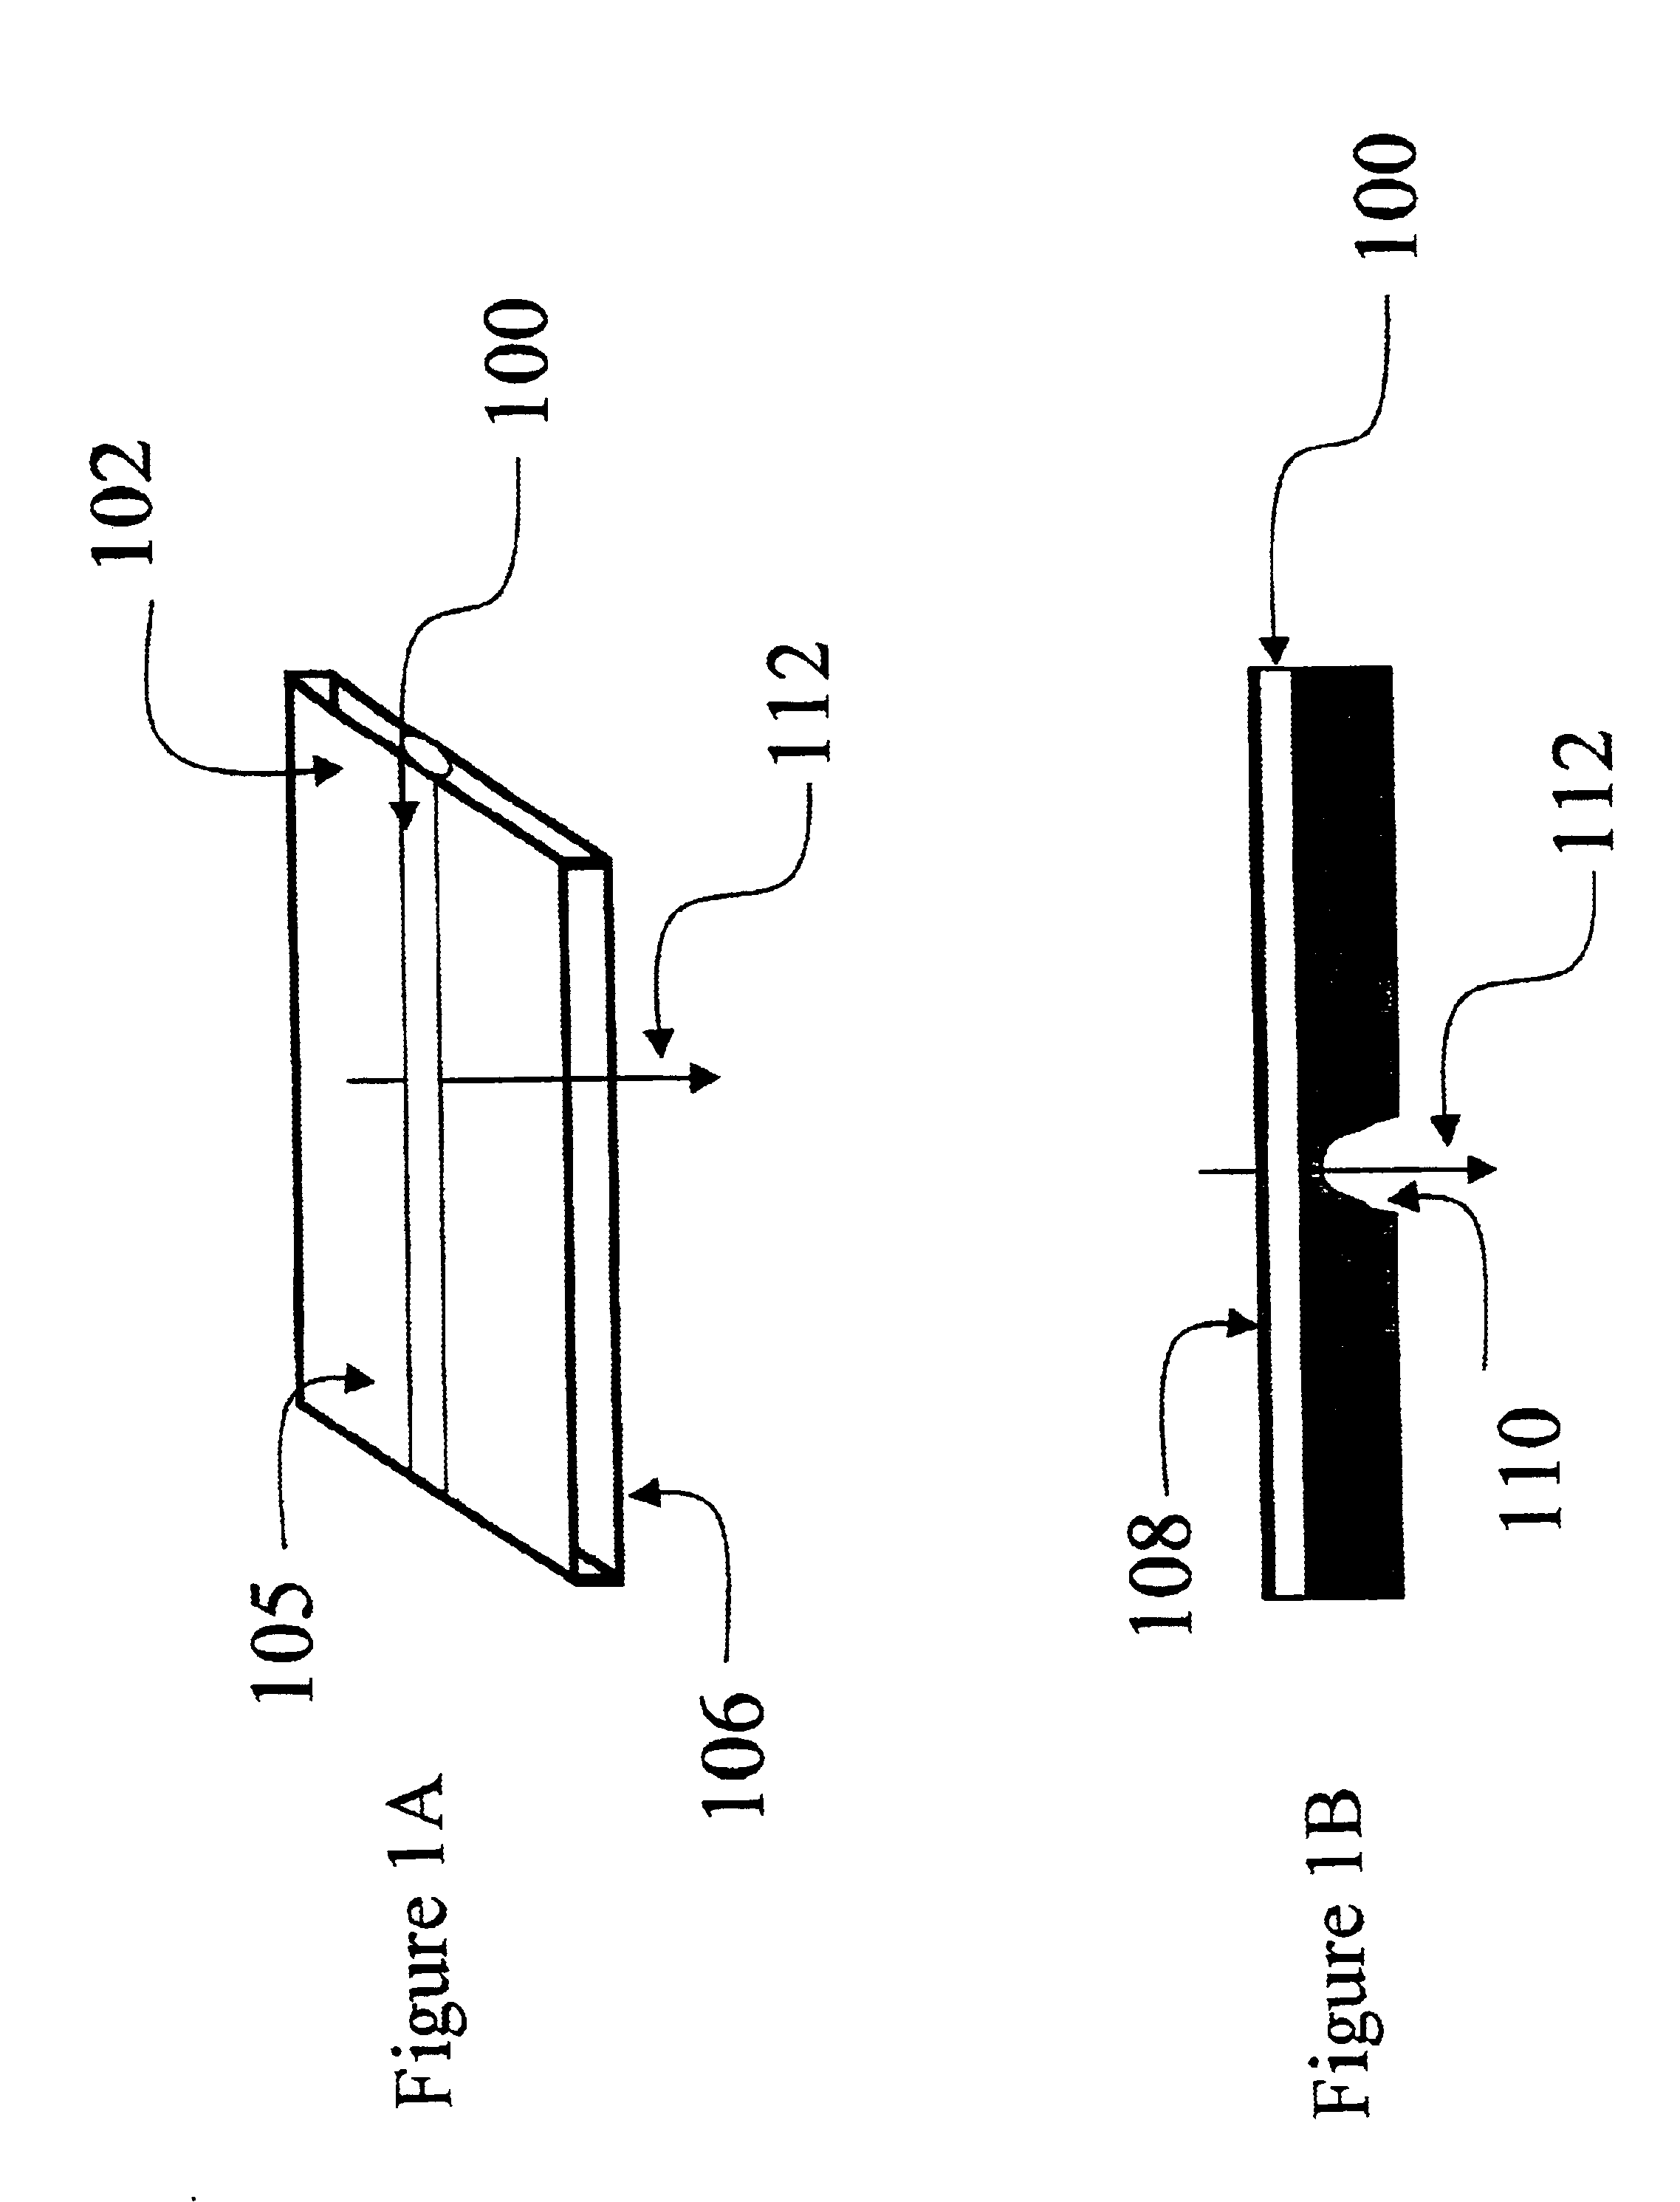 Device for detecting precipitate formation in microvolumes